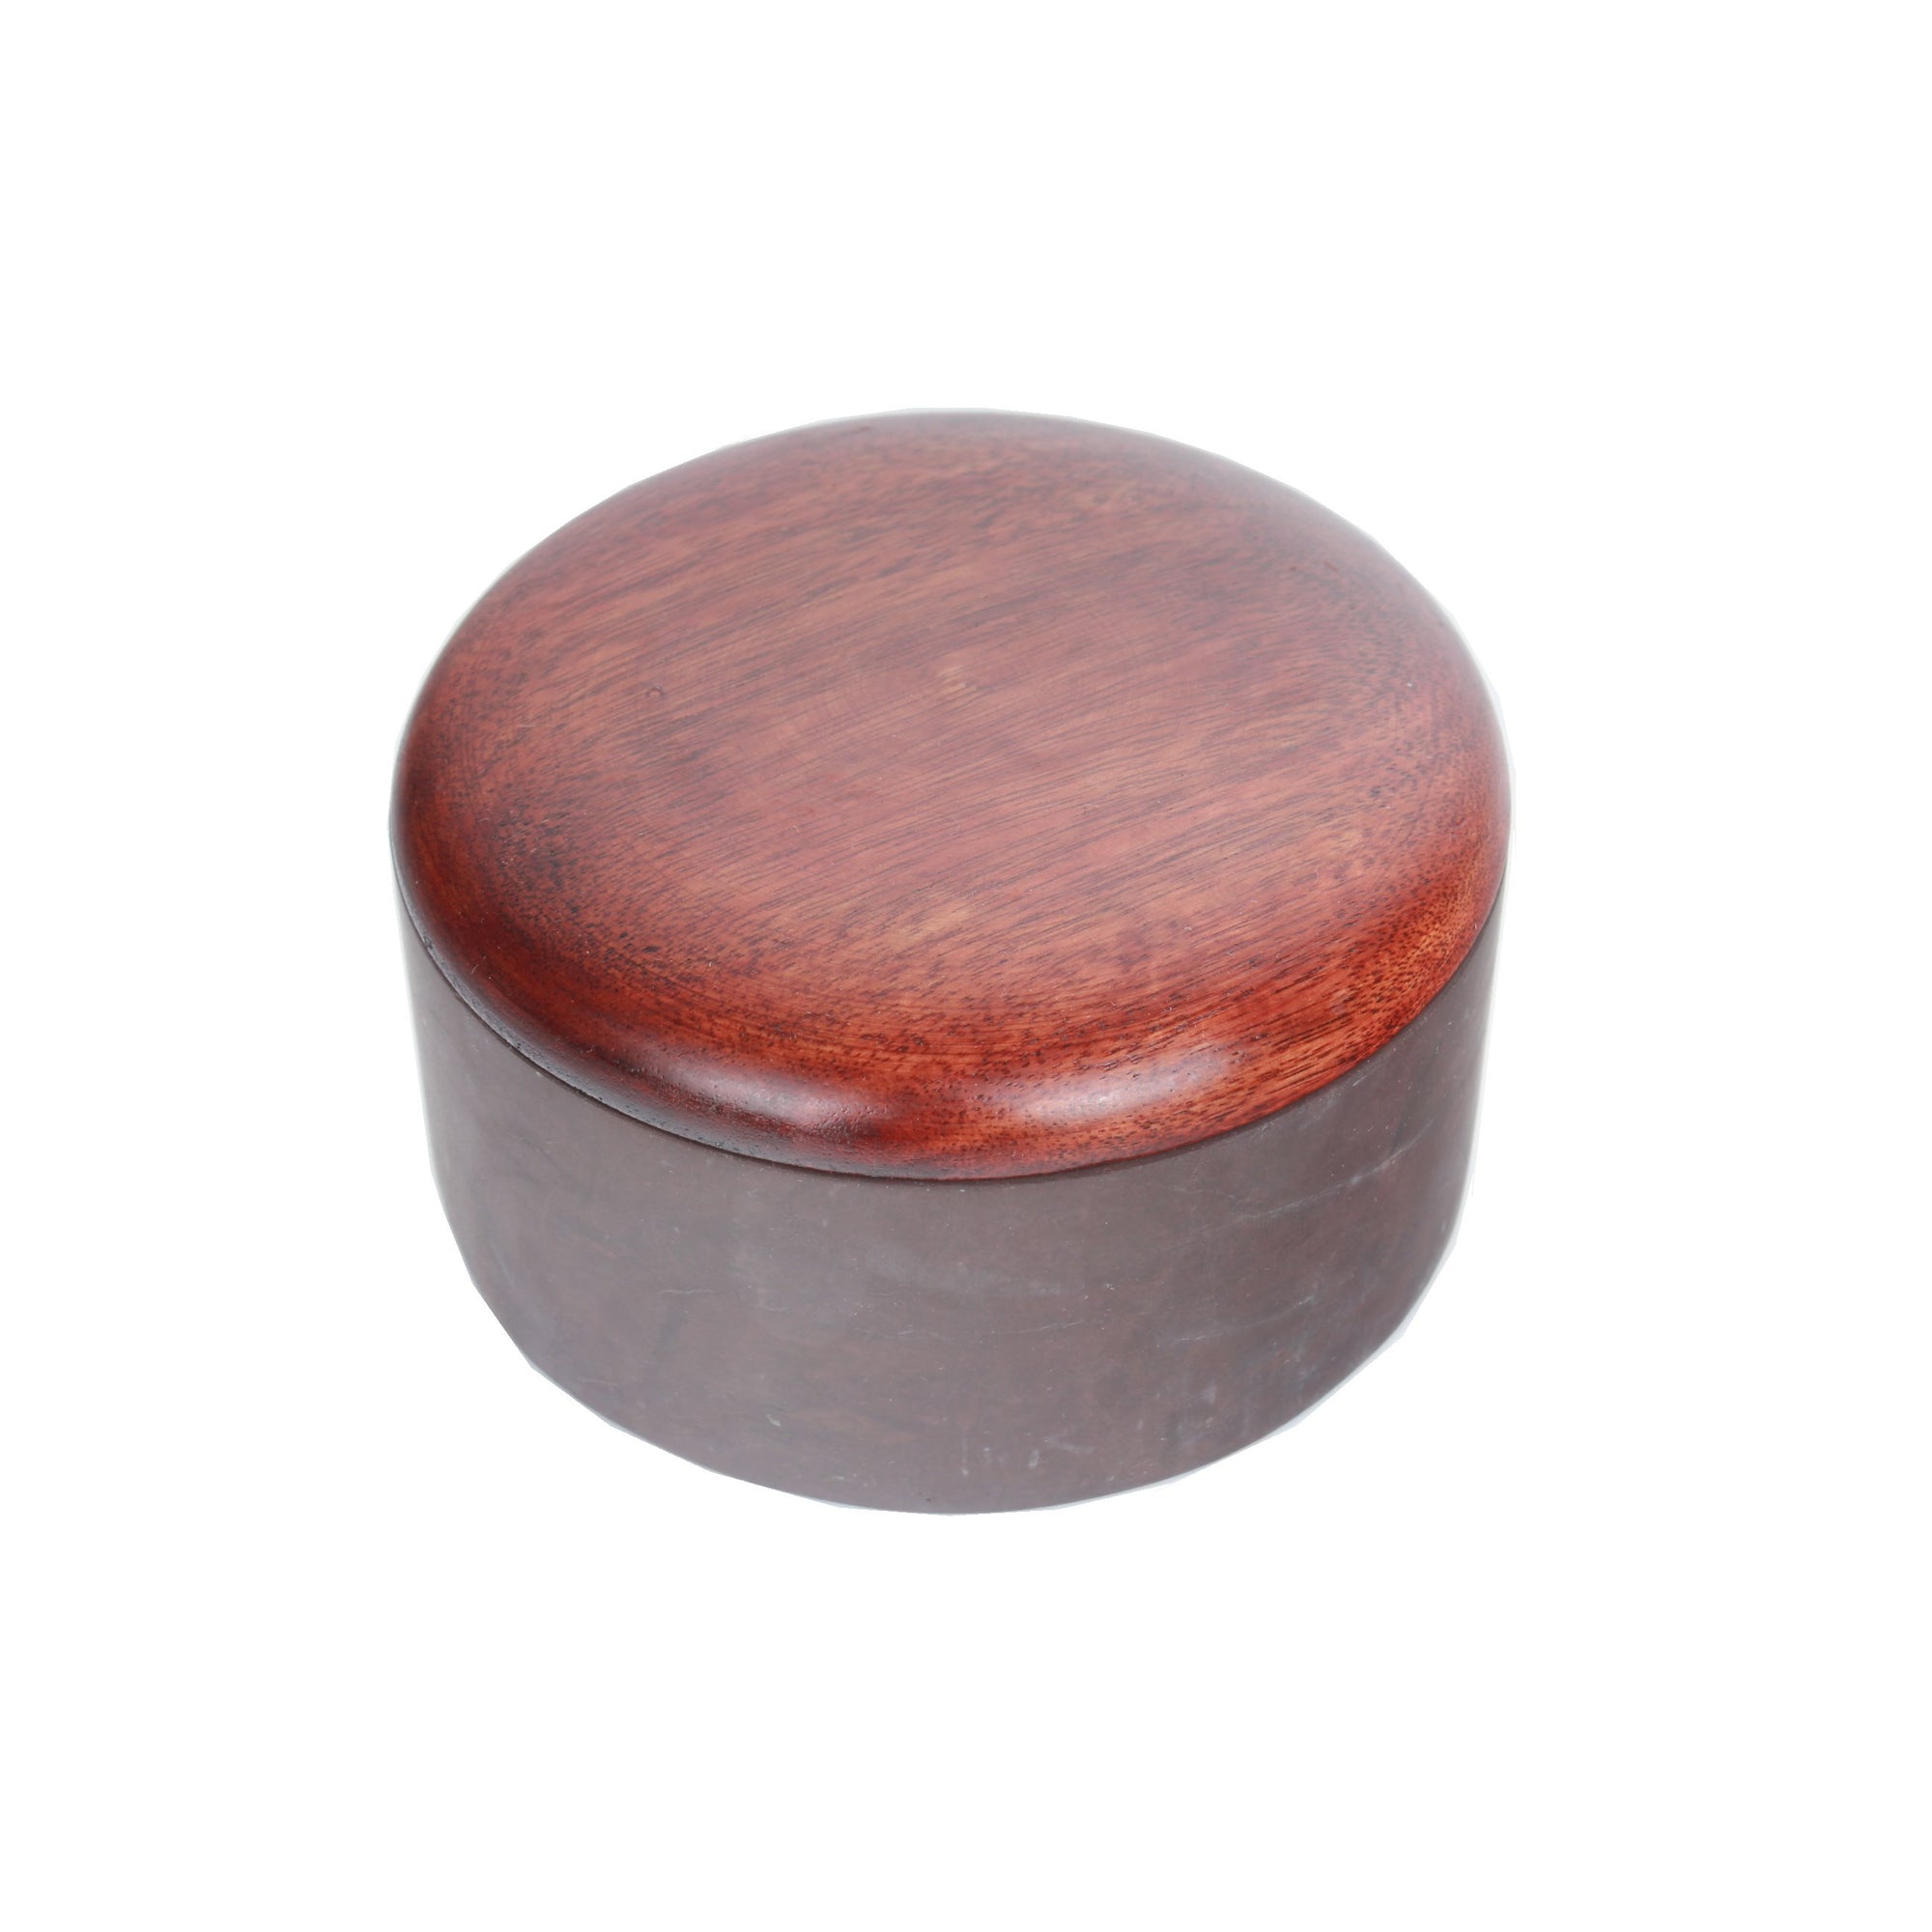 Ink Slab with a design resembling the Chinese Chess Jar (Weiqi Jar). It can be used to grind and hold the ink for your Asian Brush Painting creation